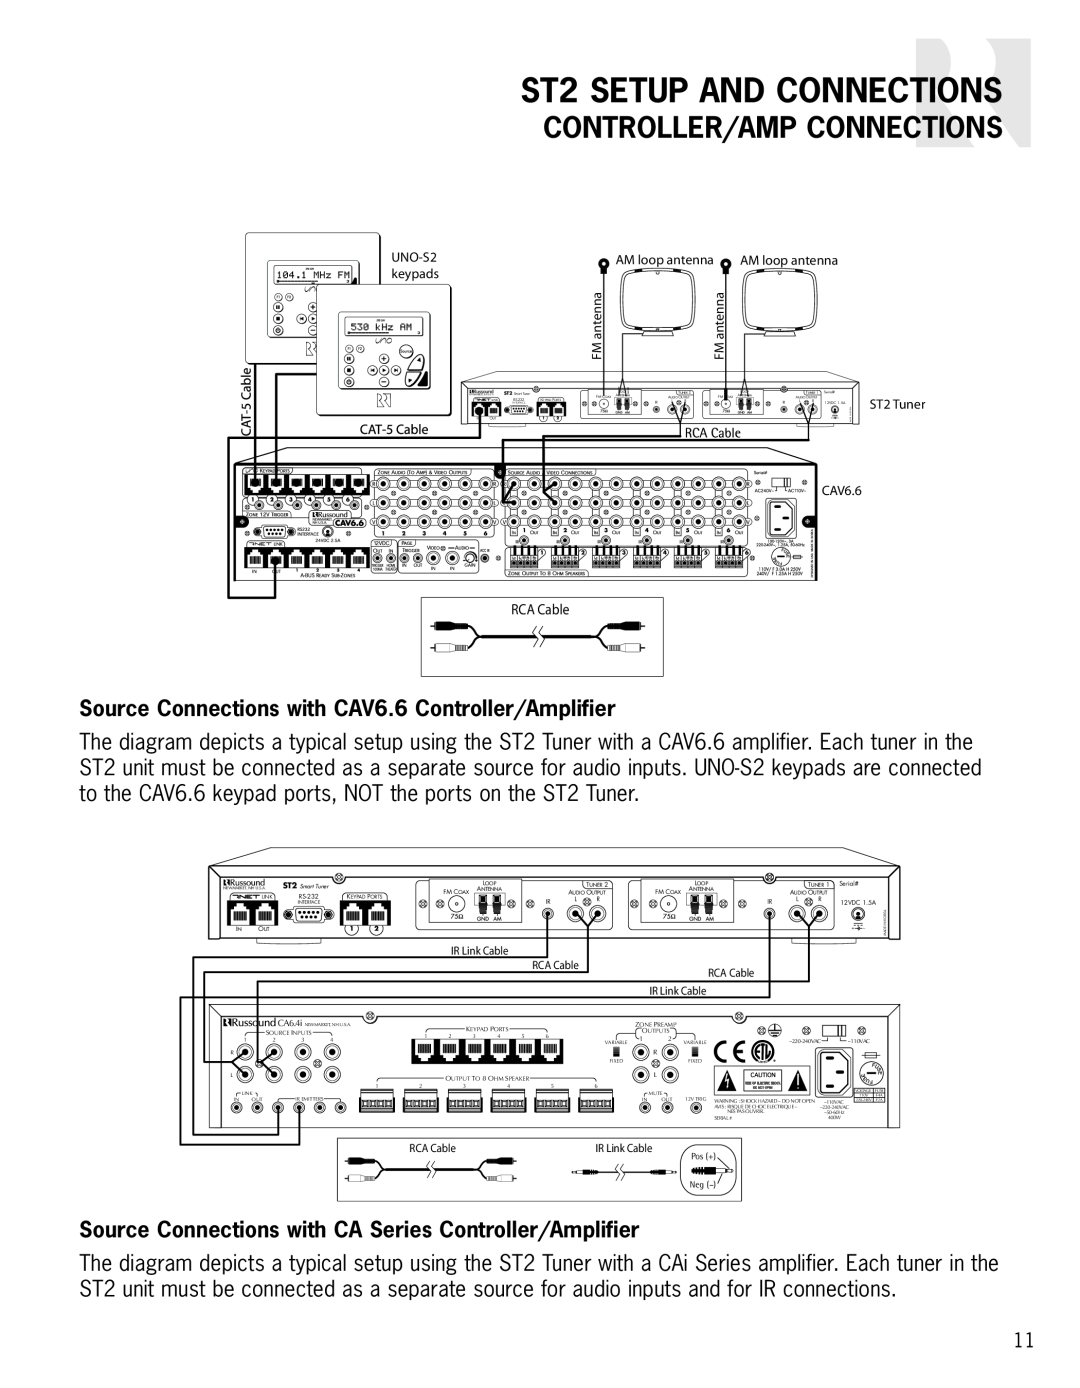 Russound Controller/Amp Connections, Source Connections with CAV6.6 Controller/Amplifier, ST2 SETUP AND CONNECTIONS 